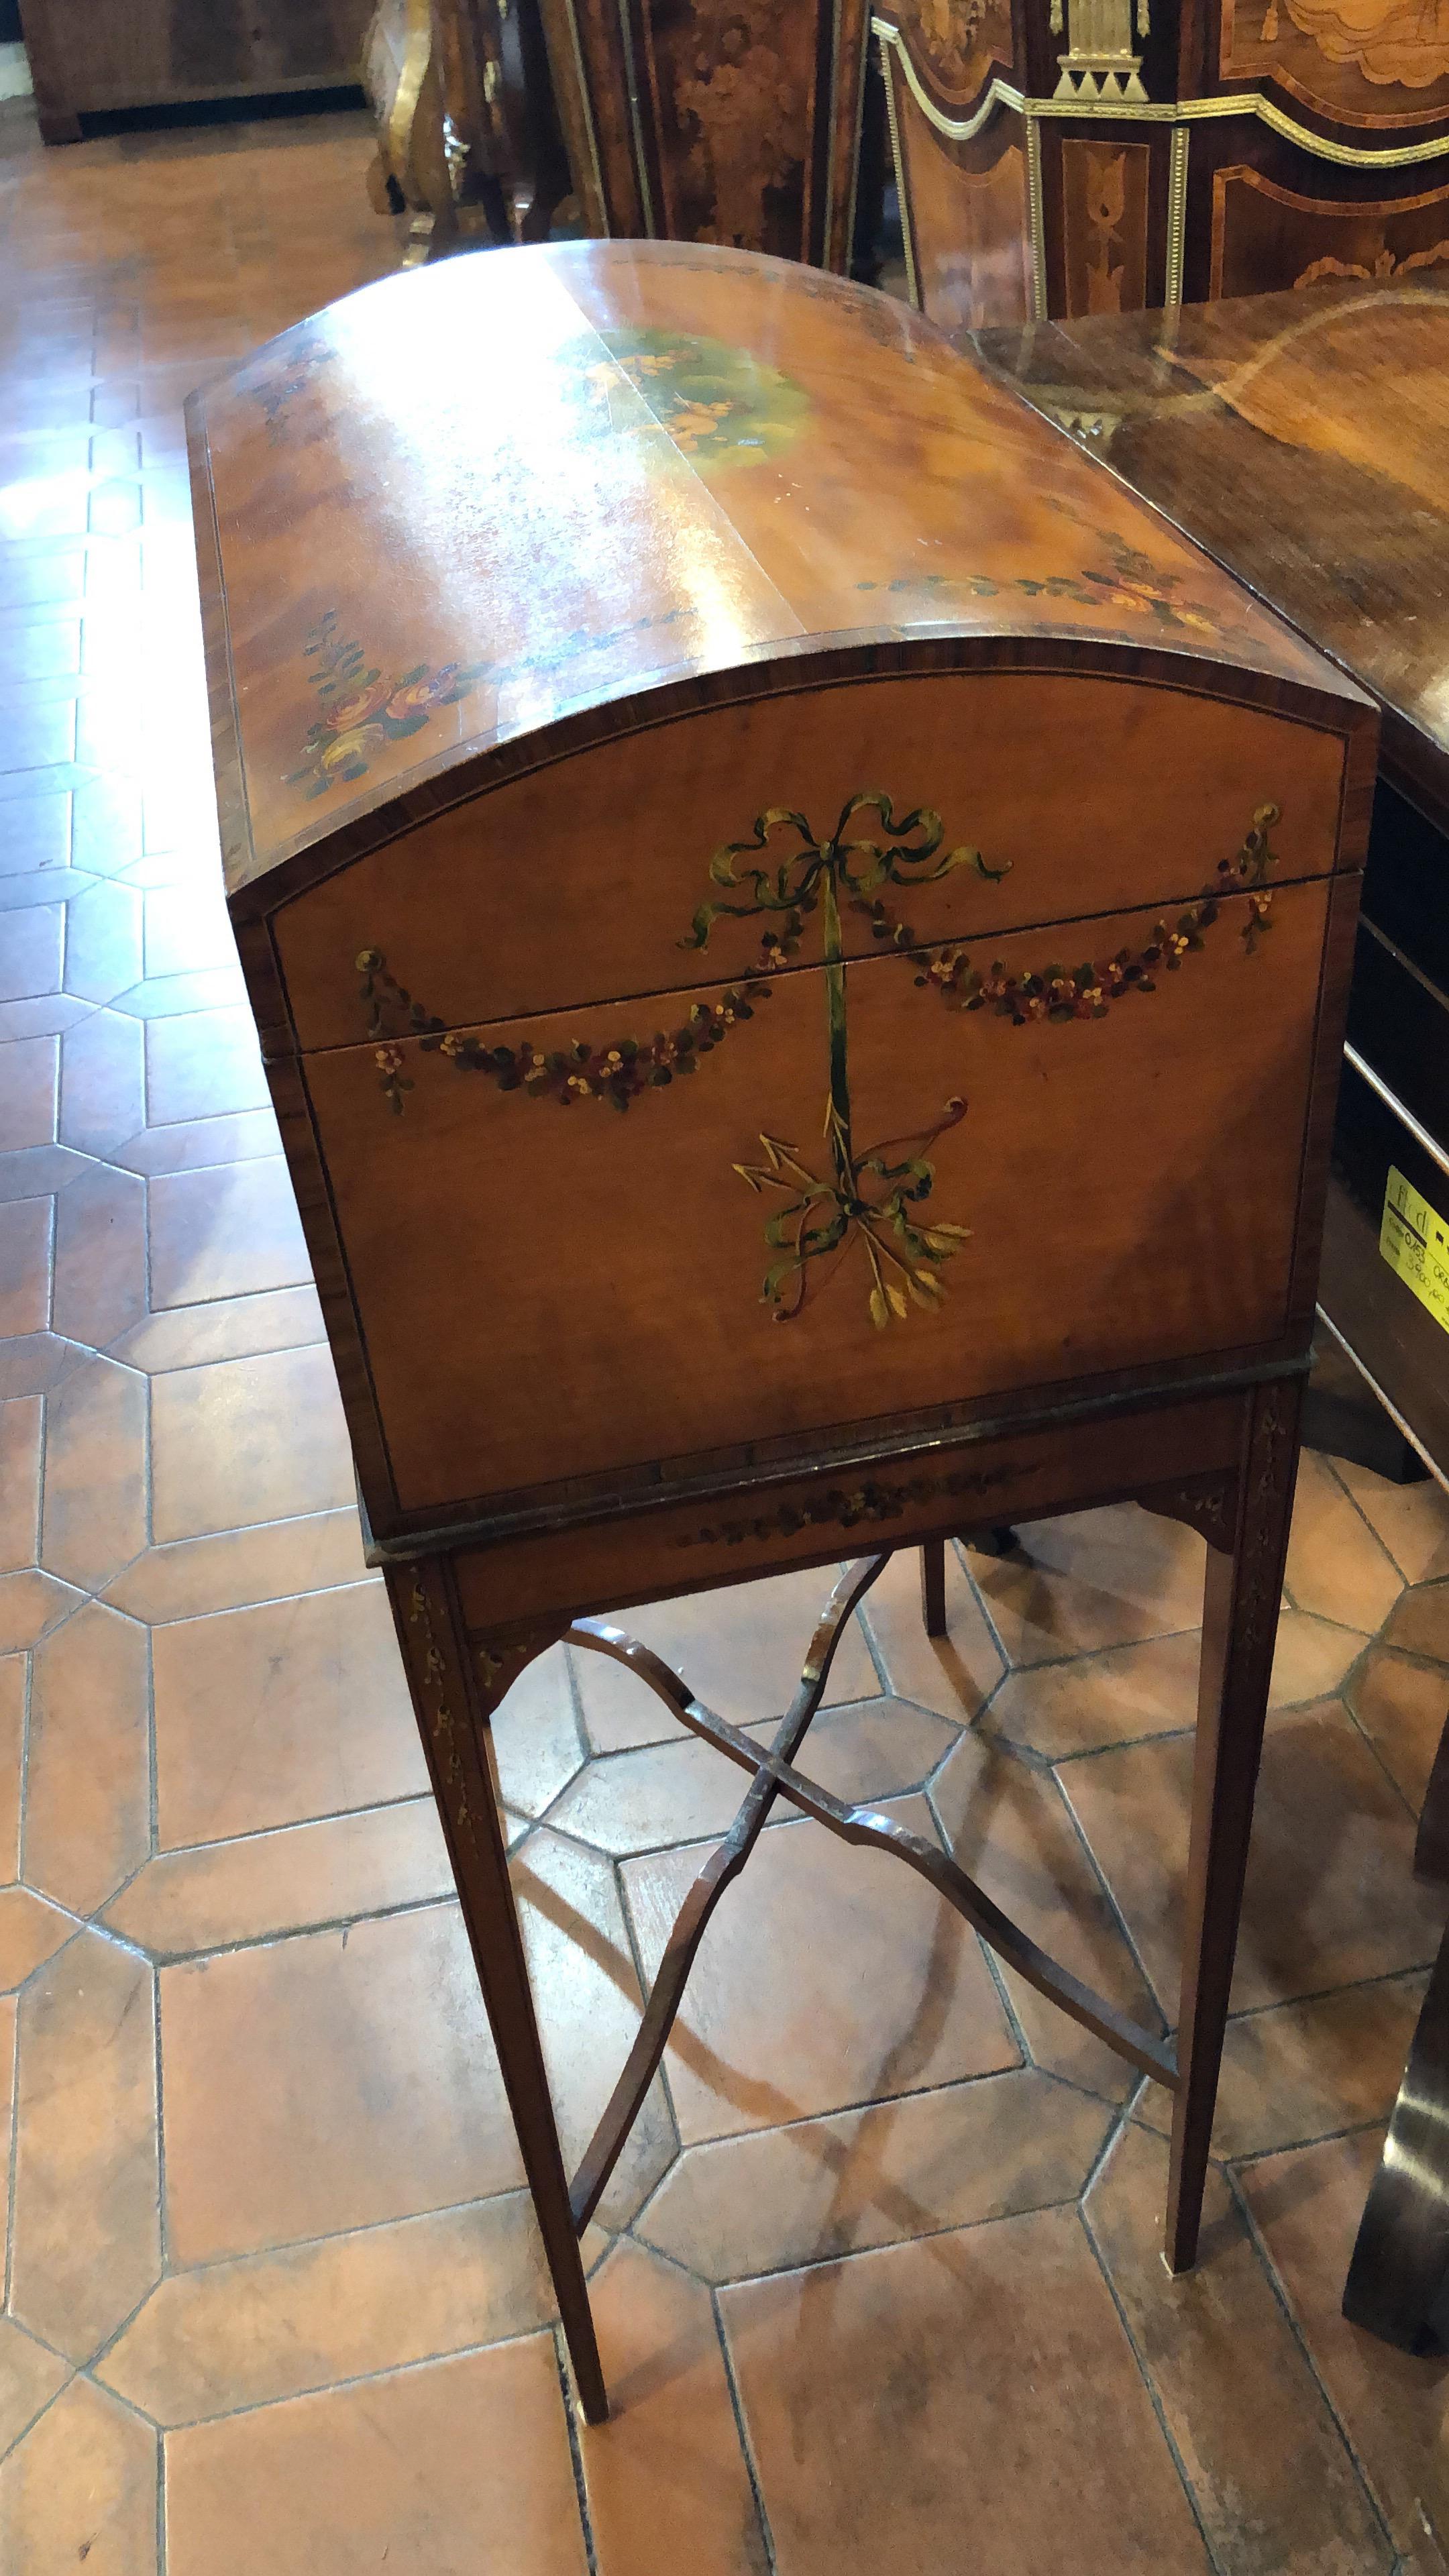 Dome top work box it is a rare piece in Satinwood, late Victorian period, hand painted...superb a Sheraton Revival, a revival that looks original for its superb workmanship, done superlatively. The paintings are in exceptional condition and of great